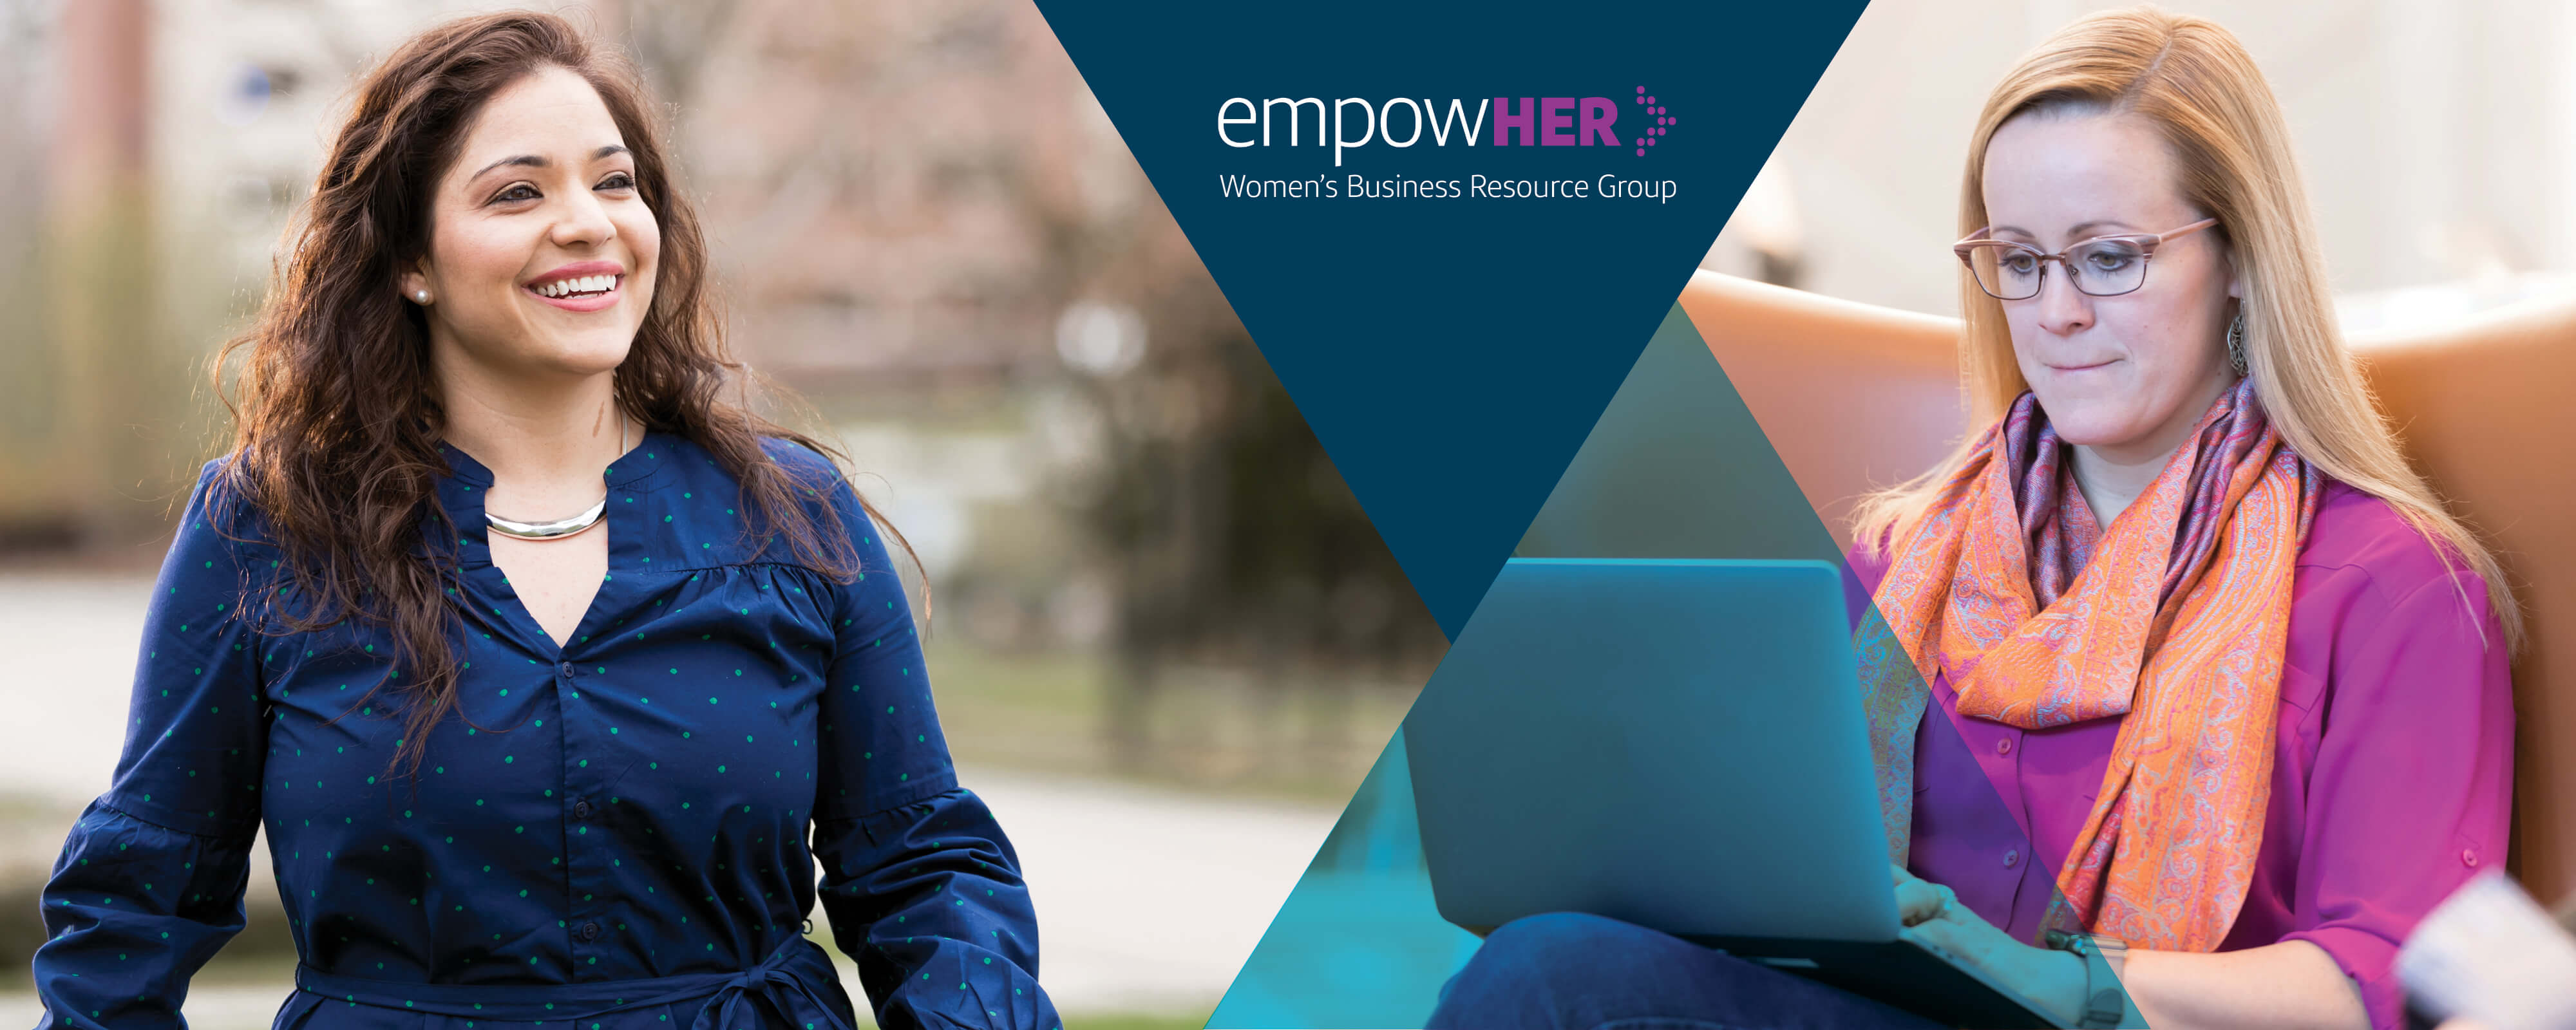 Capital One associates supporting EmpowerHER, the women's business resource group at Capital One